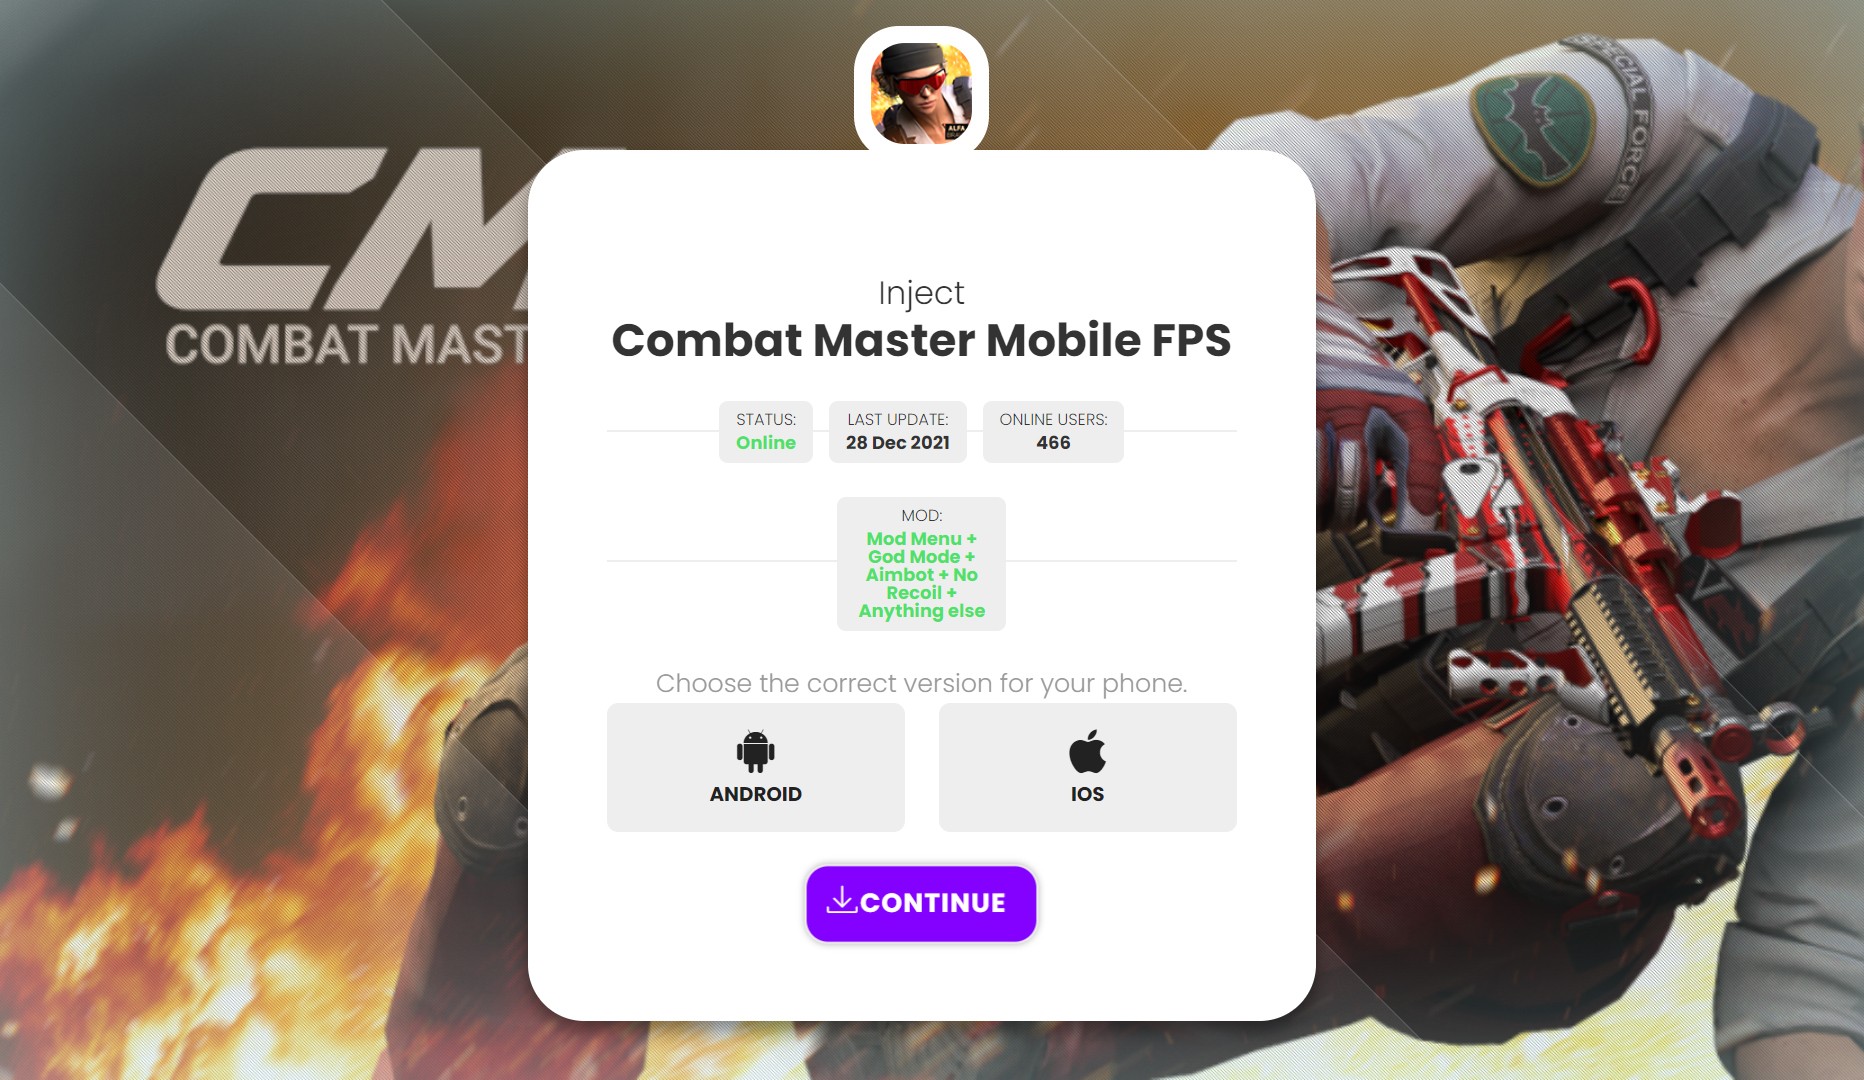 unlock everything] Combat Master Mobile FPS Hack Cheat engine Android IOS  by combat-master-hack - Issuu